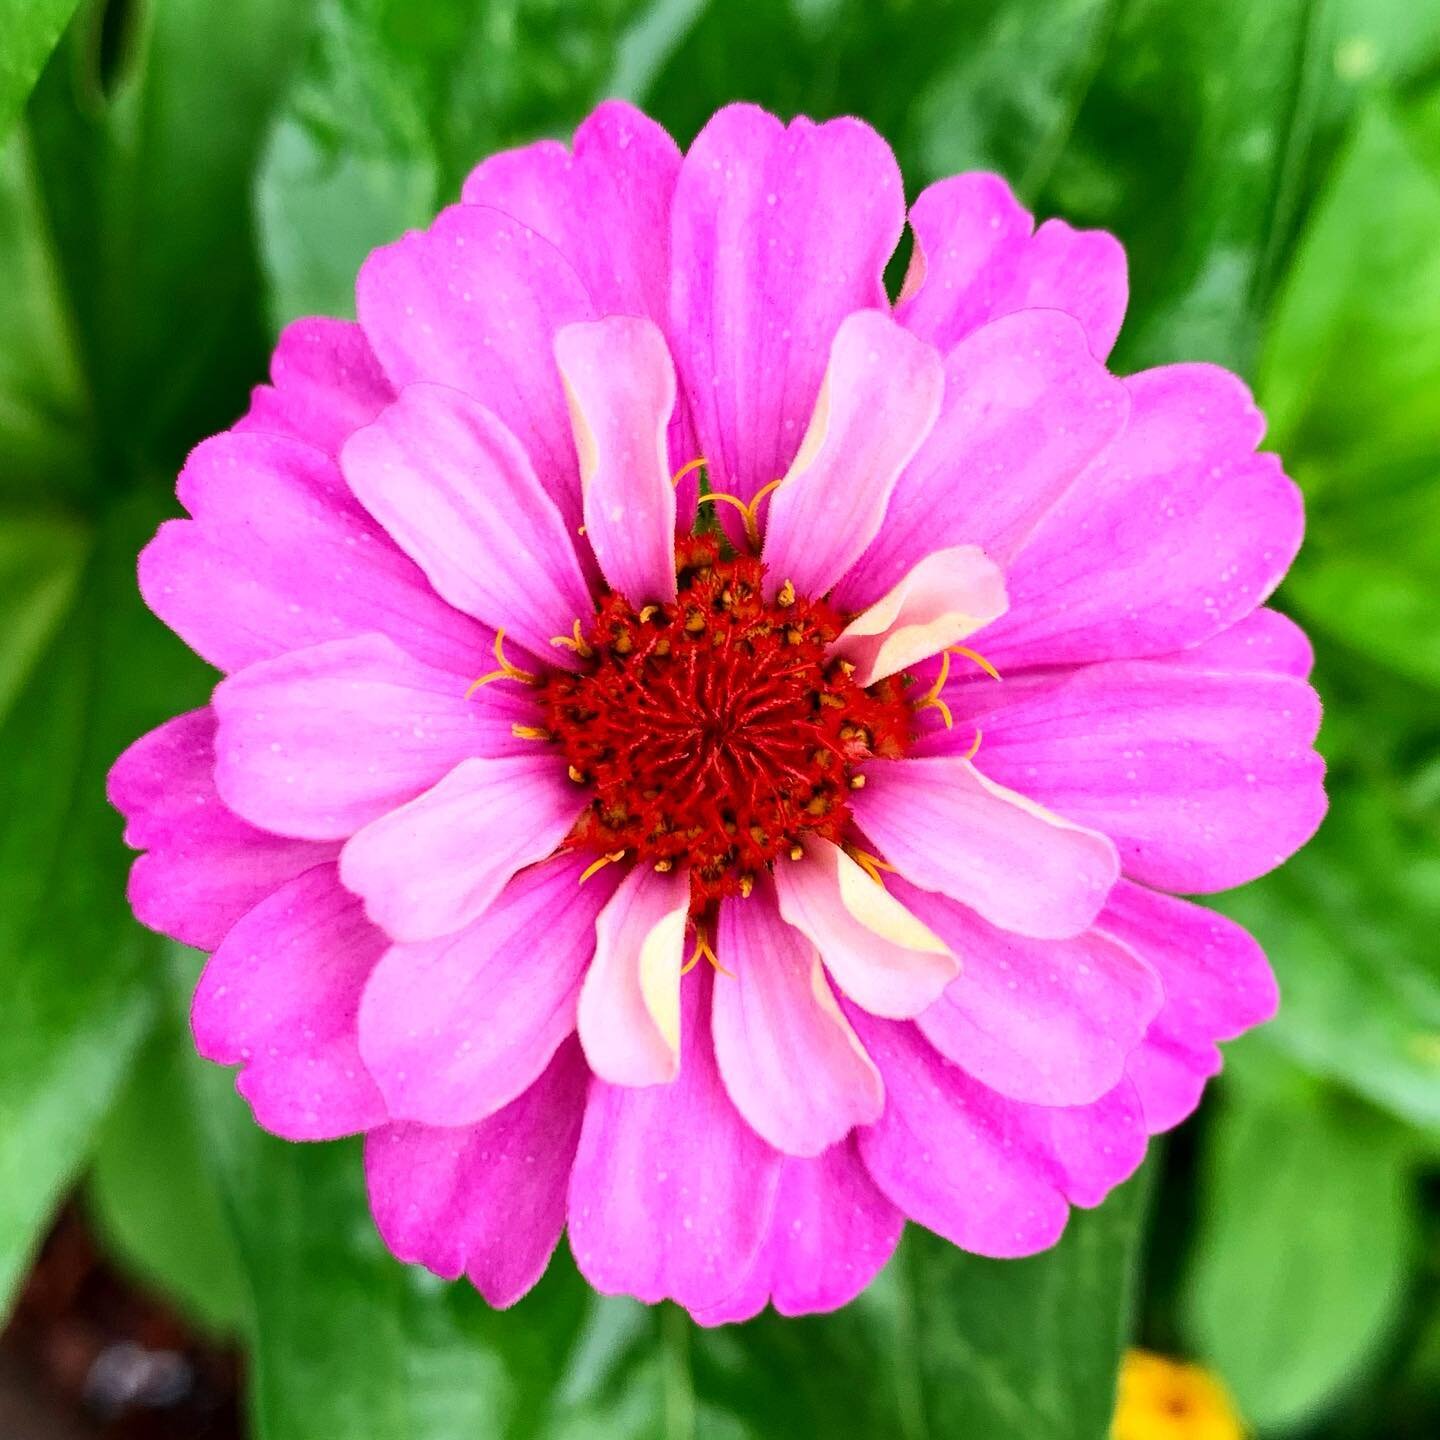 each morning I make a point to look at flowers.

a daily check in for new blooms and to see how the morning sunlight brings them to life.

this morning, this zinnia was completely showing off. 

take a moment today, even if just for second, and look 